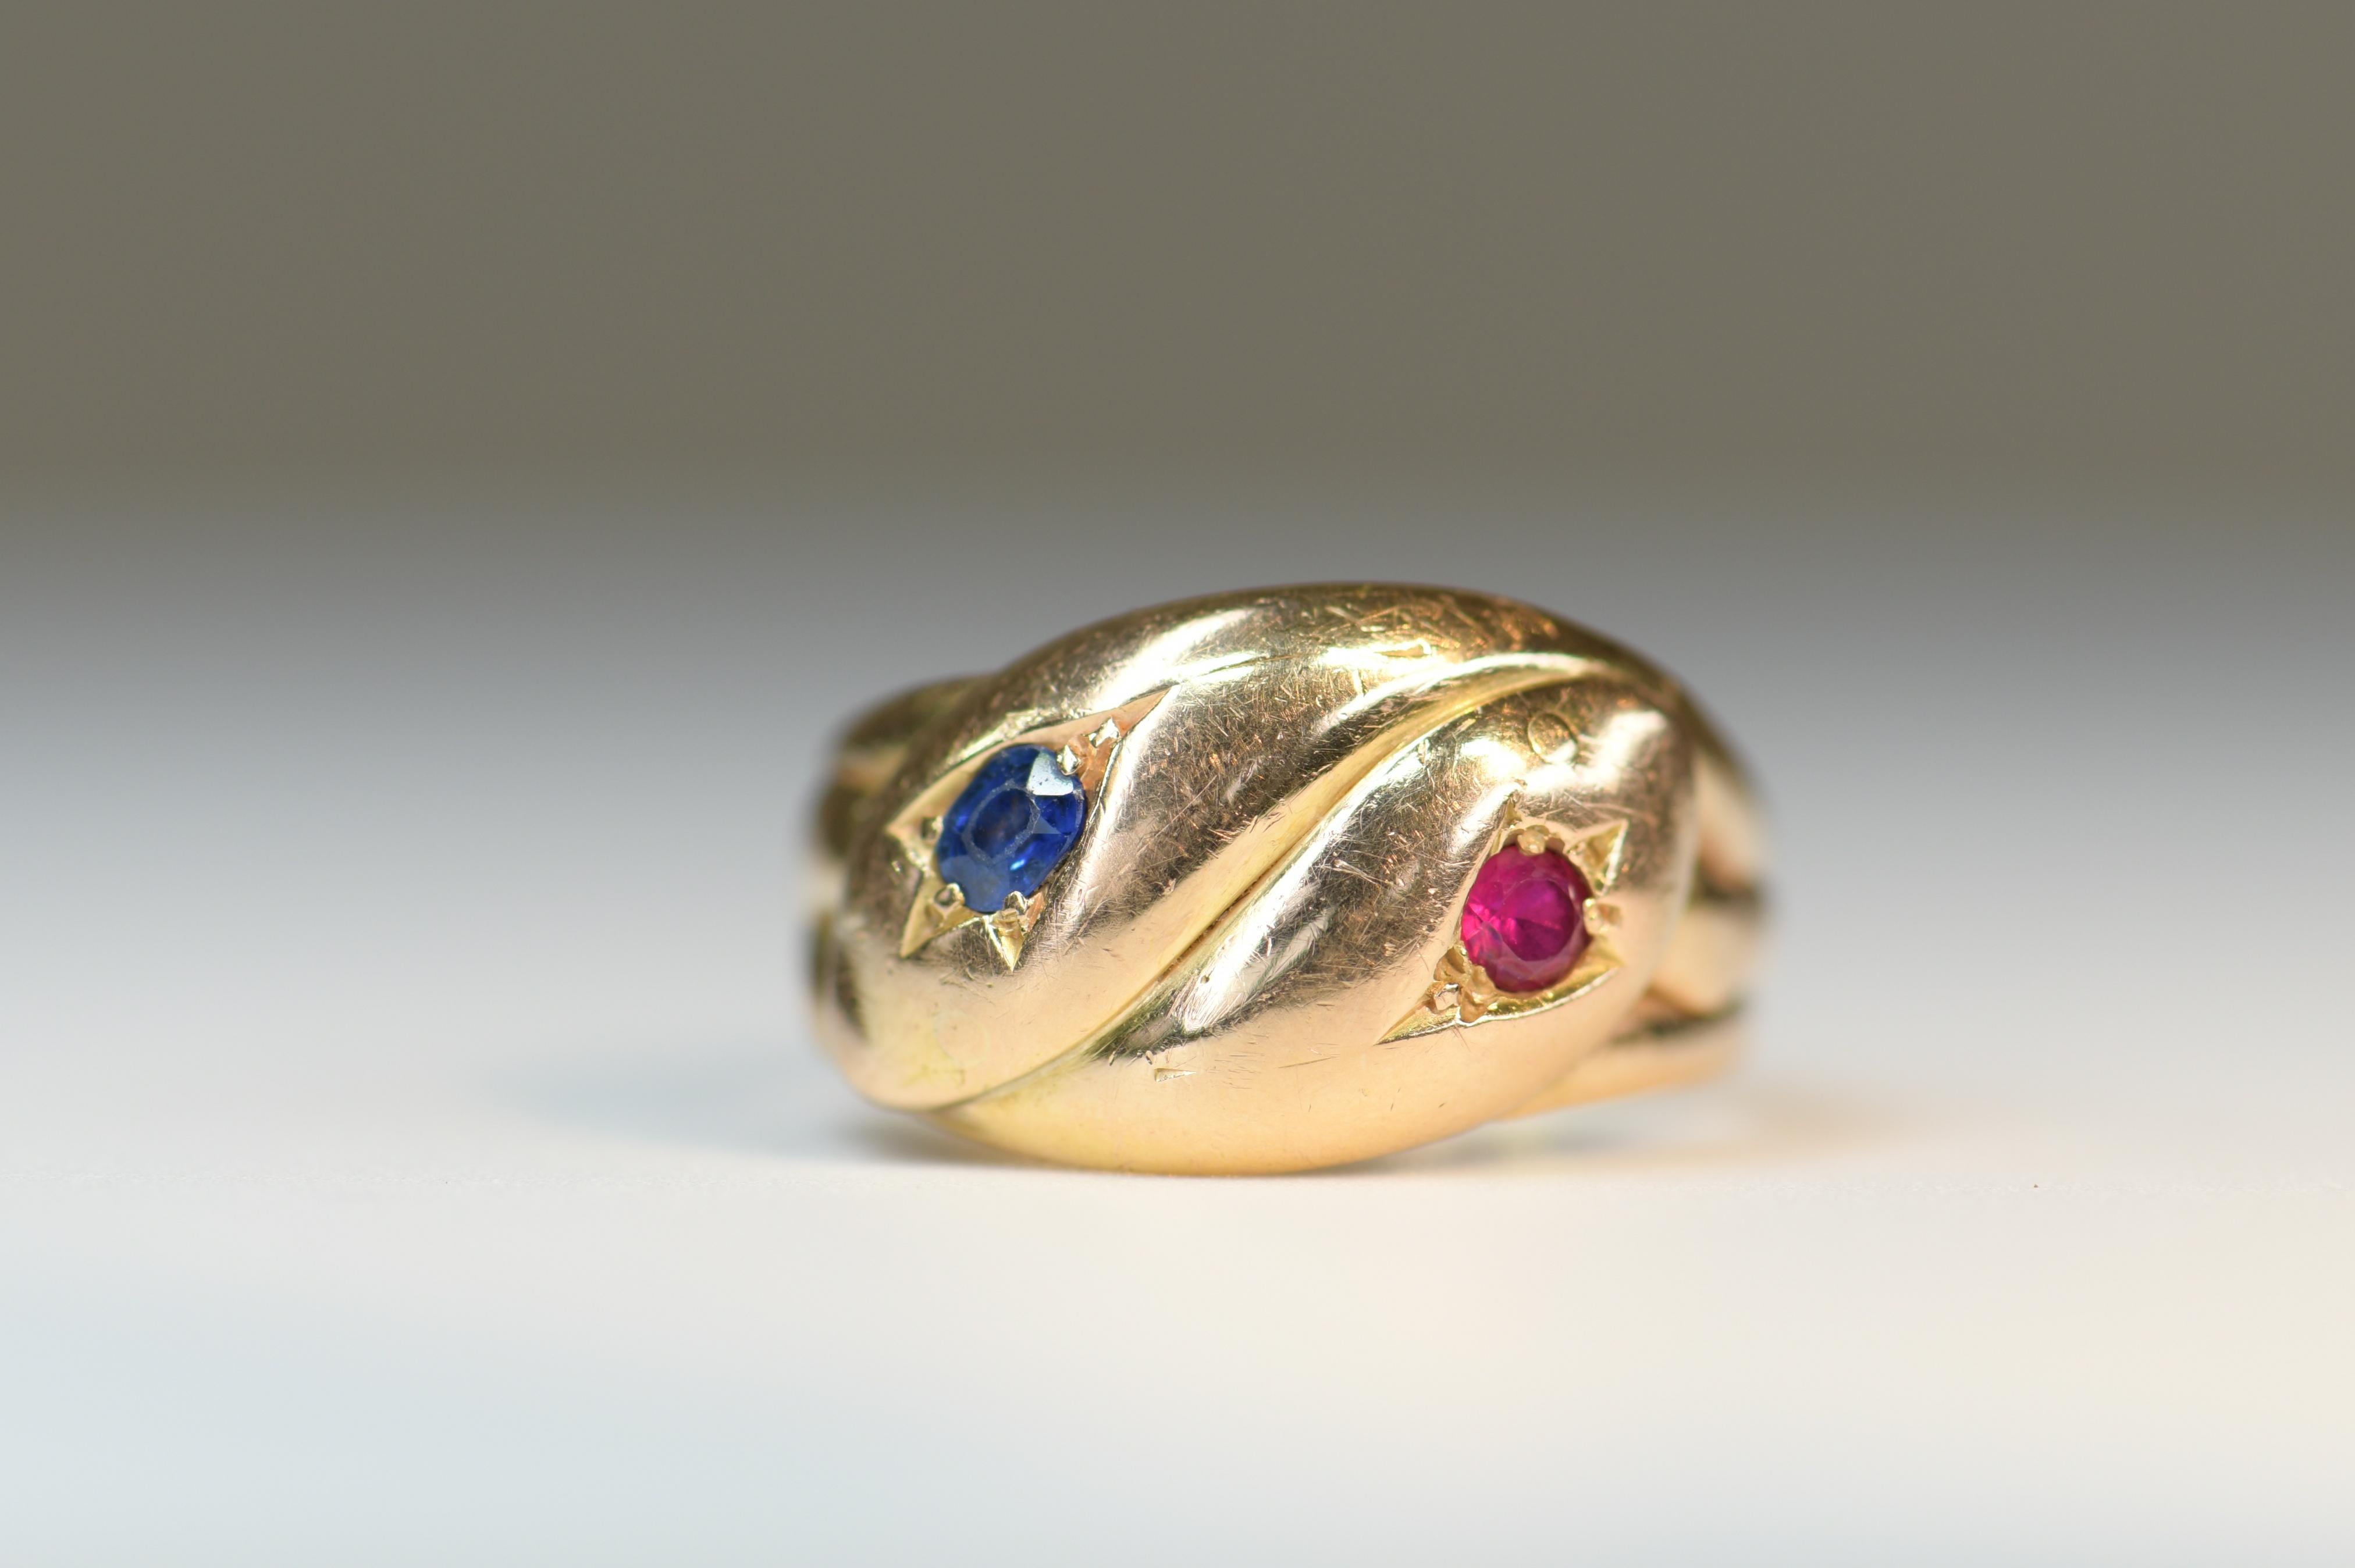 Stunning antique victorian double snake serpent ring. 2 yellow gold snakes entwined together with ruby and sapphire gem set heads.

Snakes are a symbol of everlasting eternal love, and became quite popular in the 1800's when Prince Albert presented